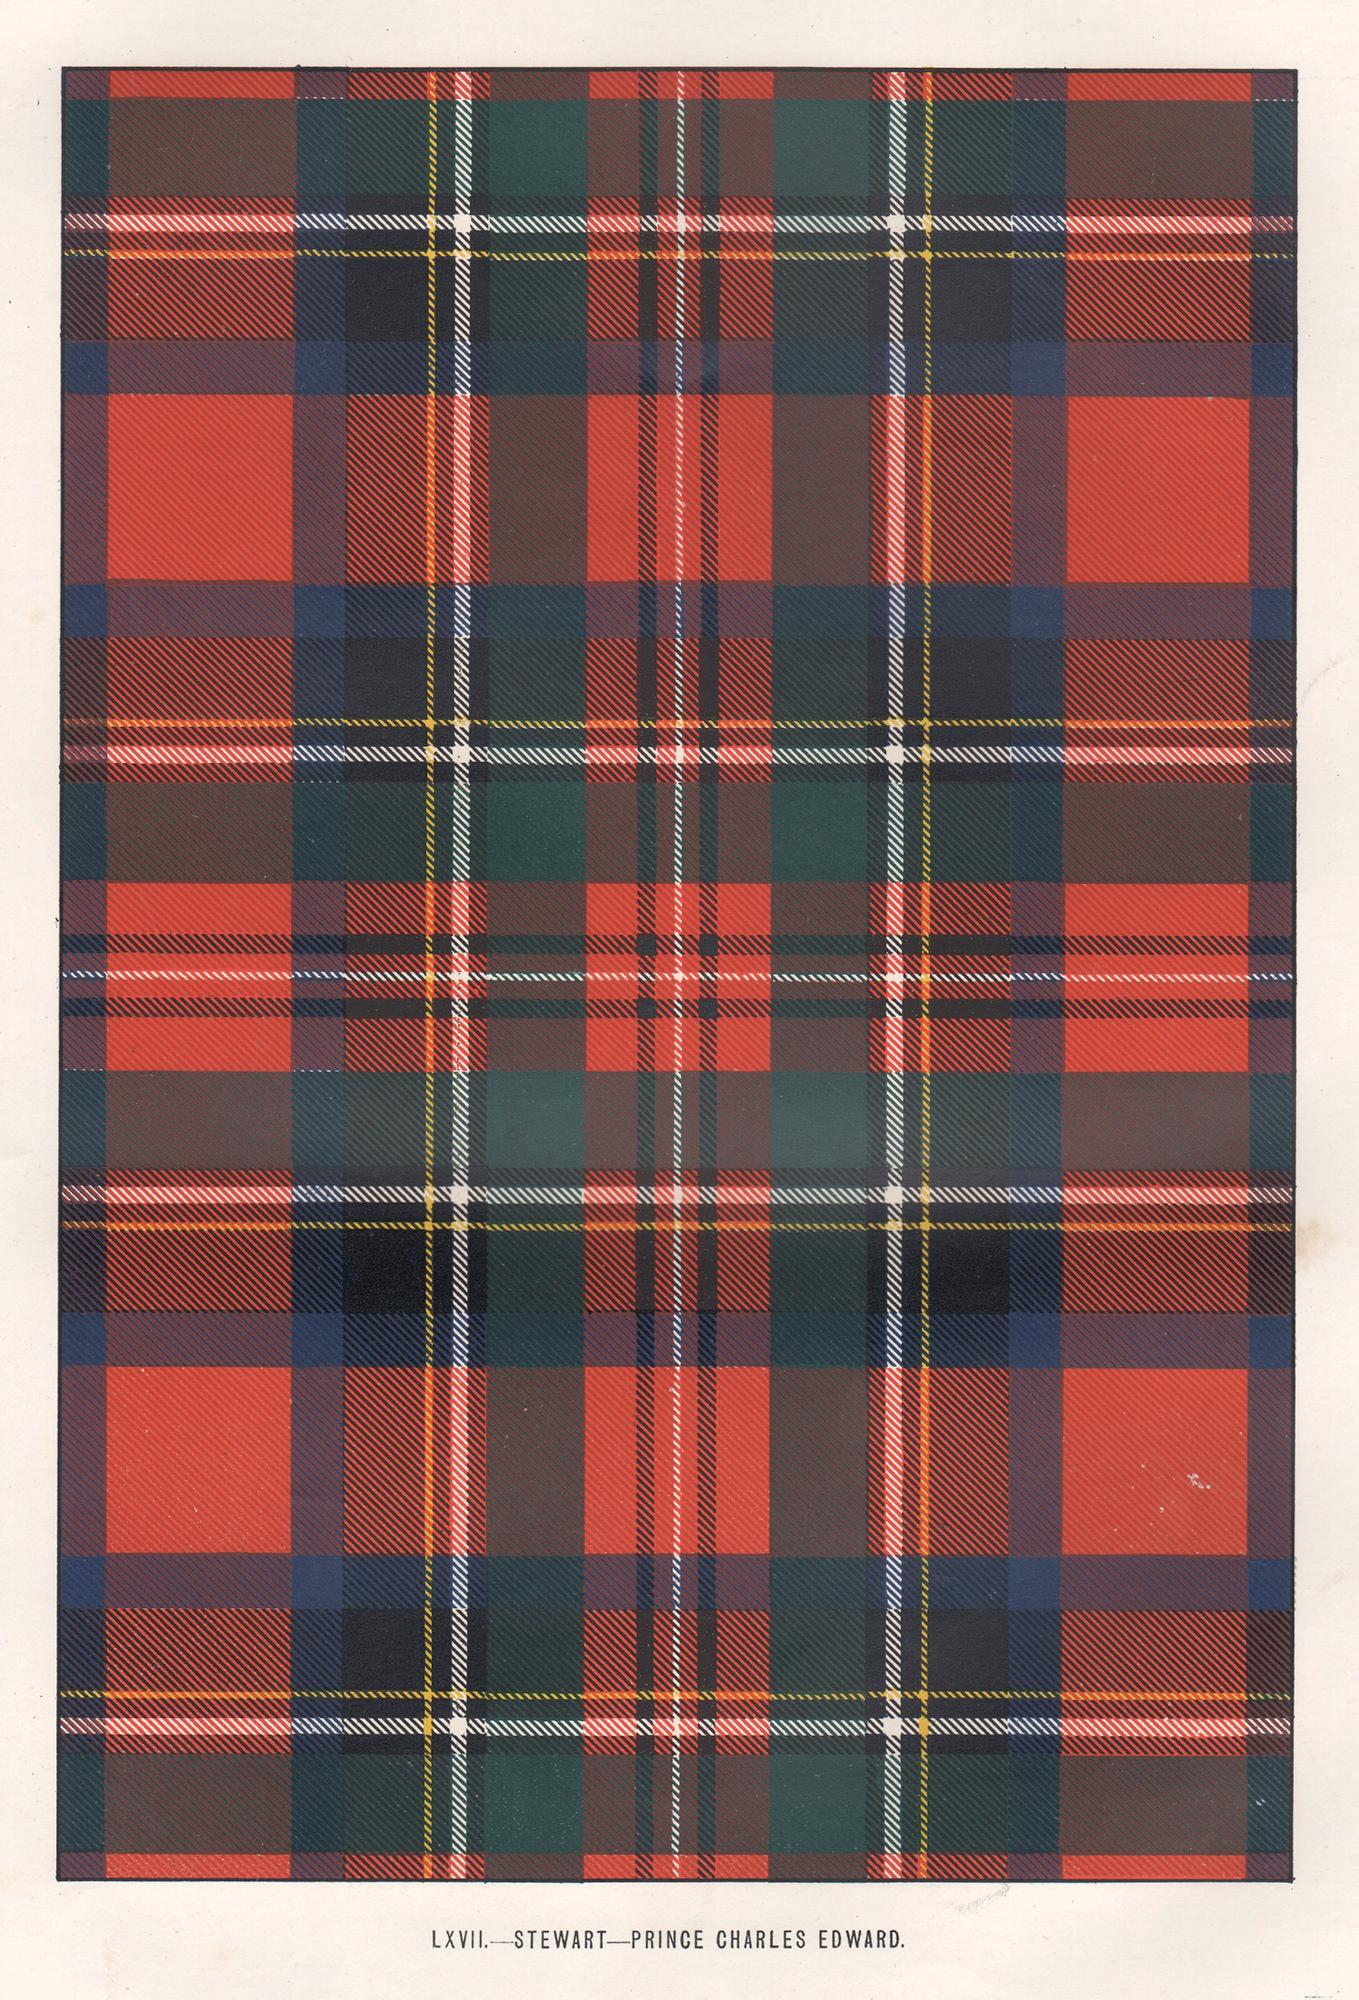 Abstract Print Unknown - Lithographie écossaise Stewart - Prince Charles Edward (tartan), Écosse